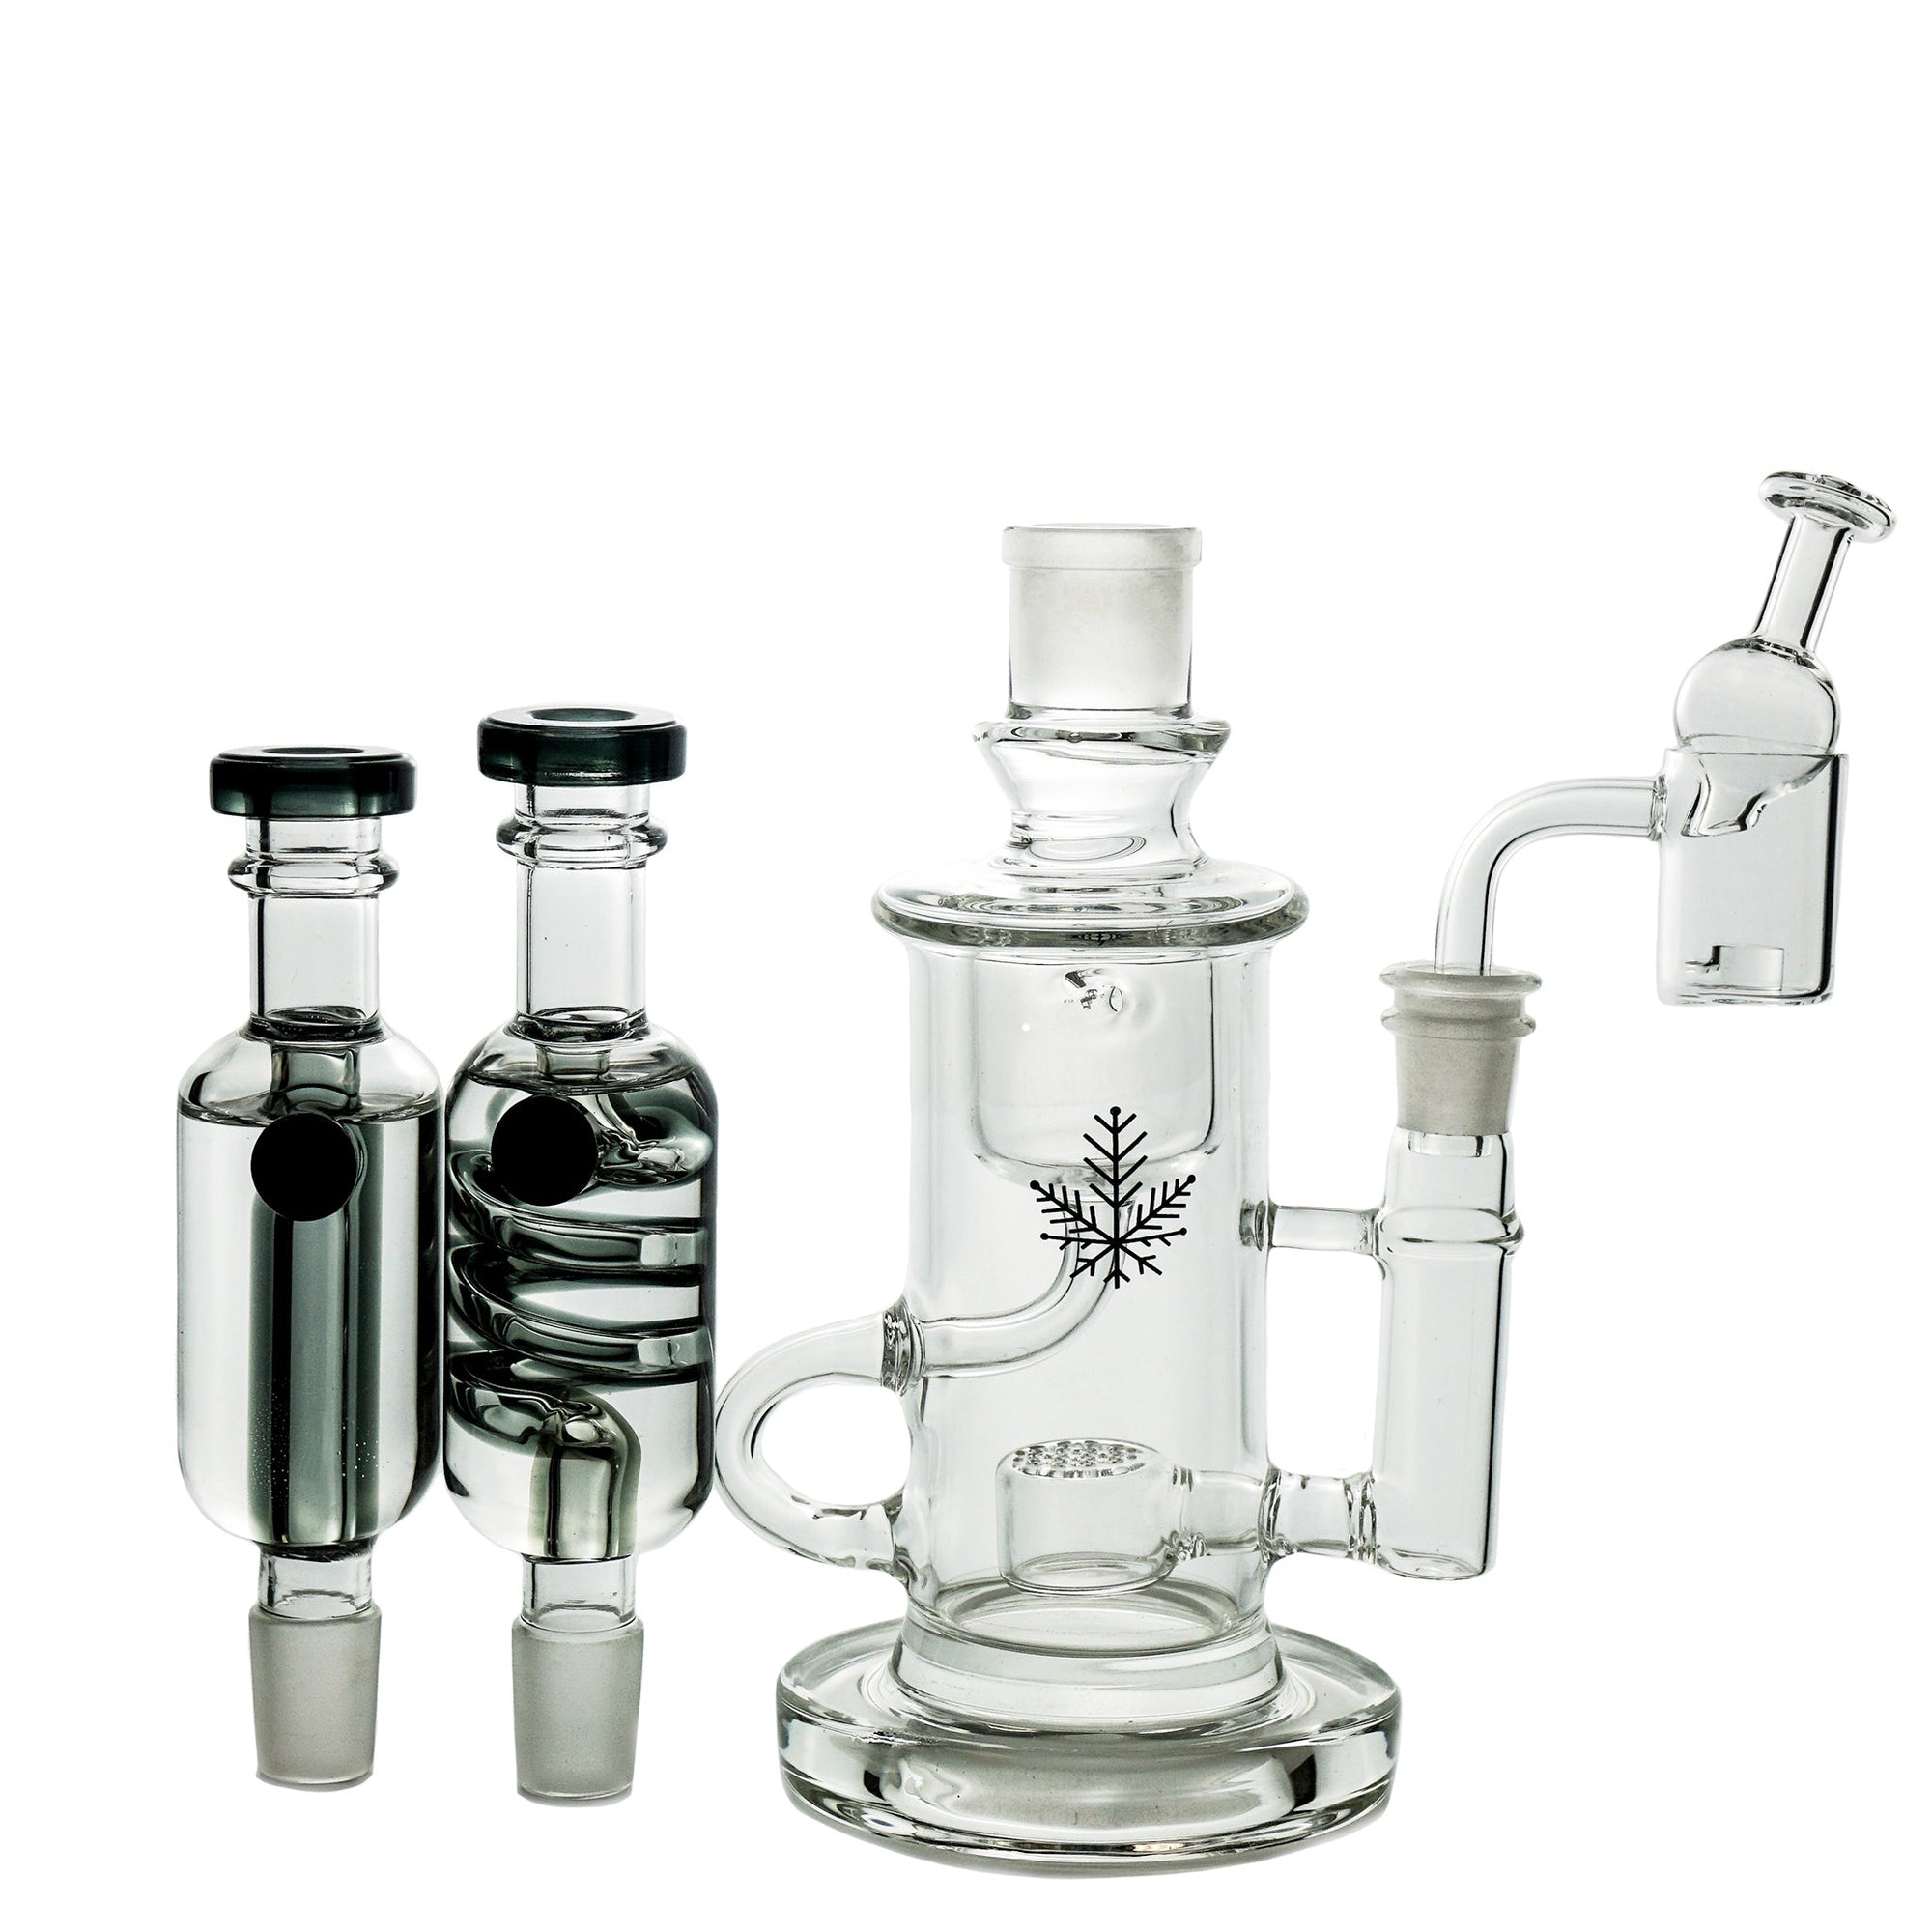 Freeze Pipe Klein Recycler (ONLINE ONLY)